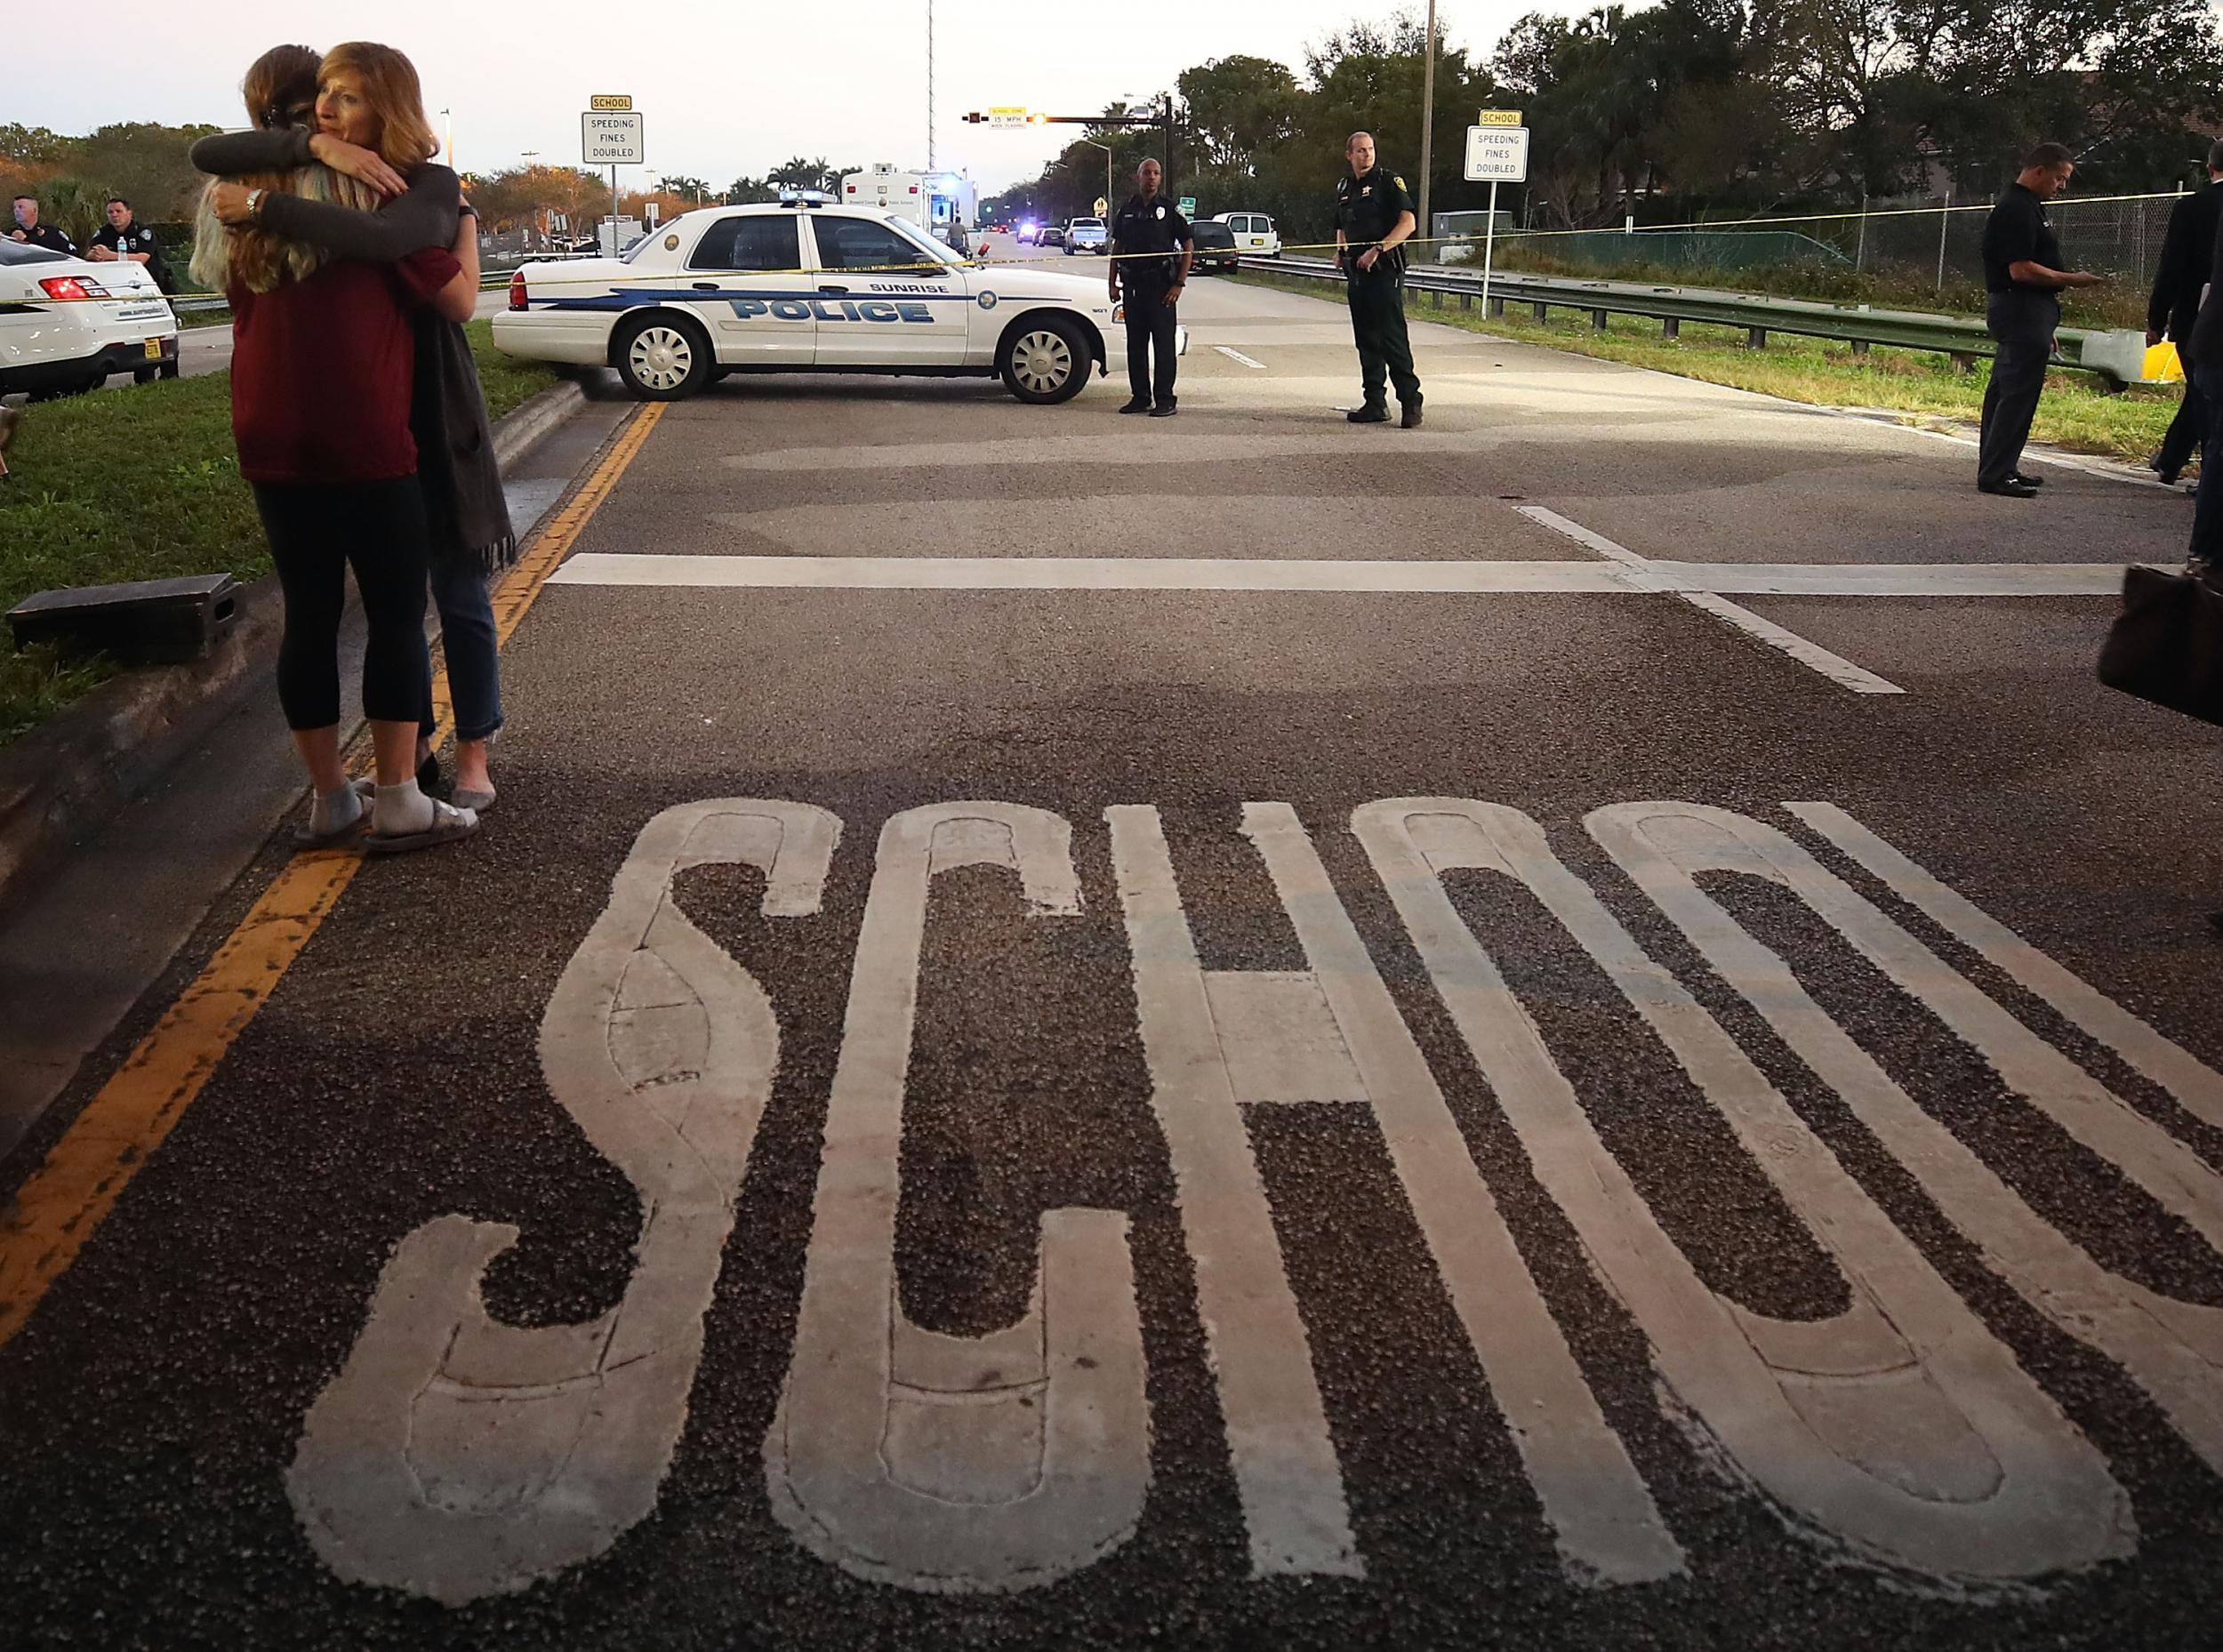 Two young women hug at a police checkpoint near the Marjory Stoneman Douglas High School where 17 people were killed by a gunman on 15 February 2018 in Parkland, Florida.